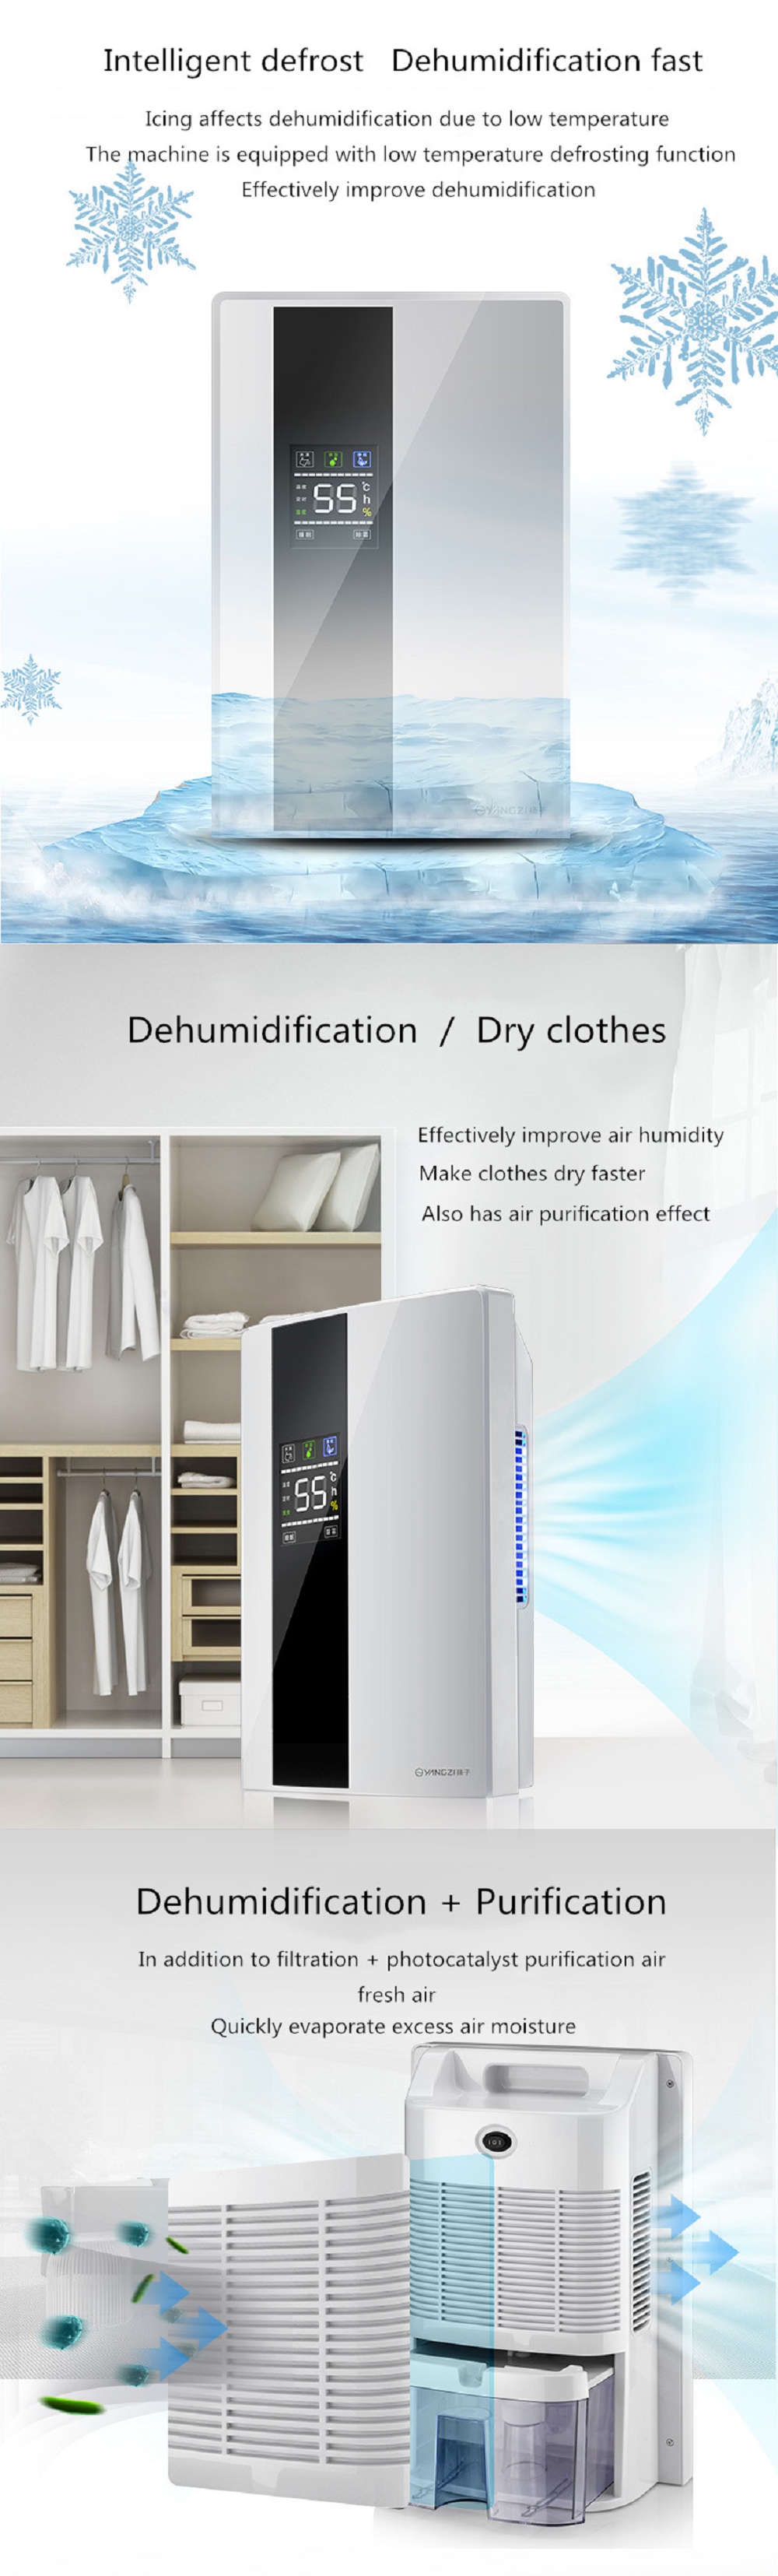 90W-Dehumidifier-Moisture-Absorber-Indoor-Dehumidifier-LCD-Display-Low-Noise-Remote-Control-Timing-E-1702908-5